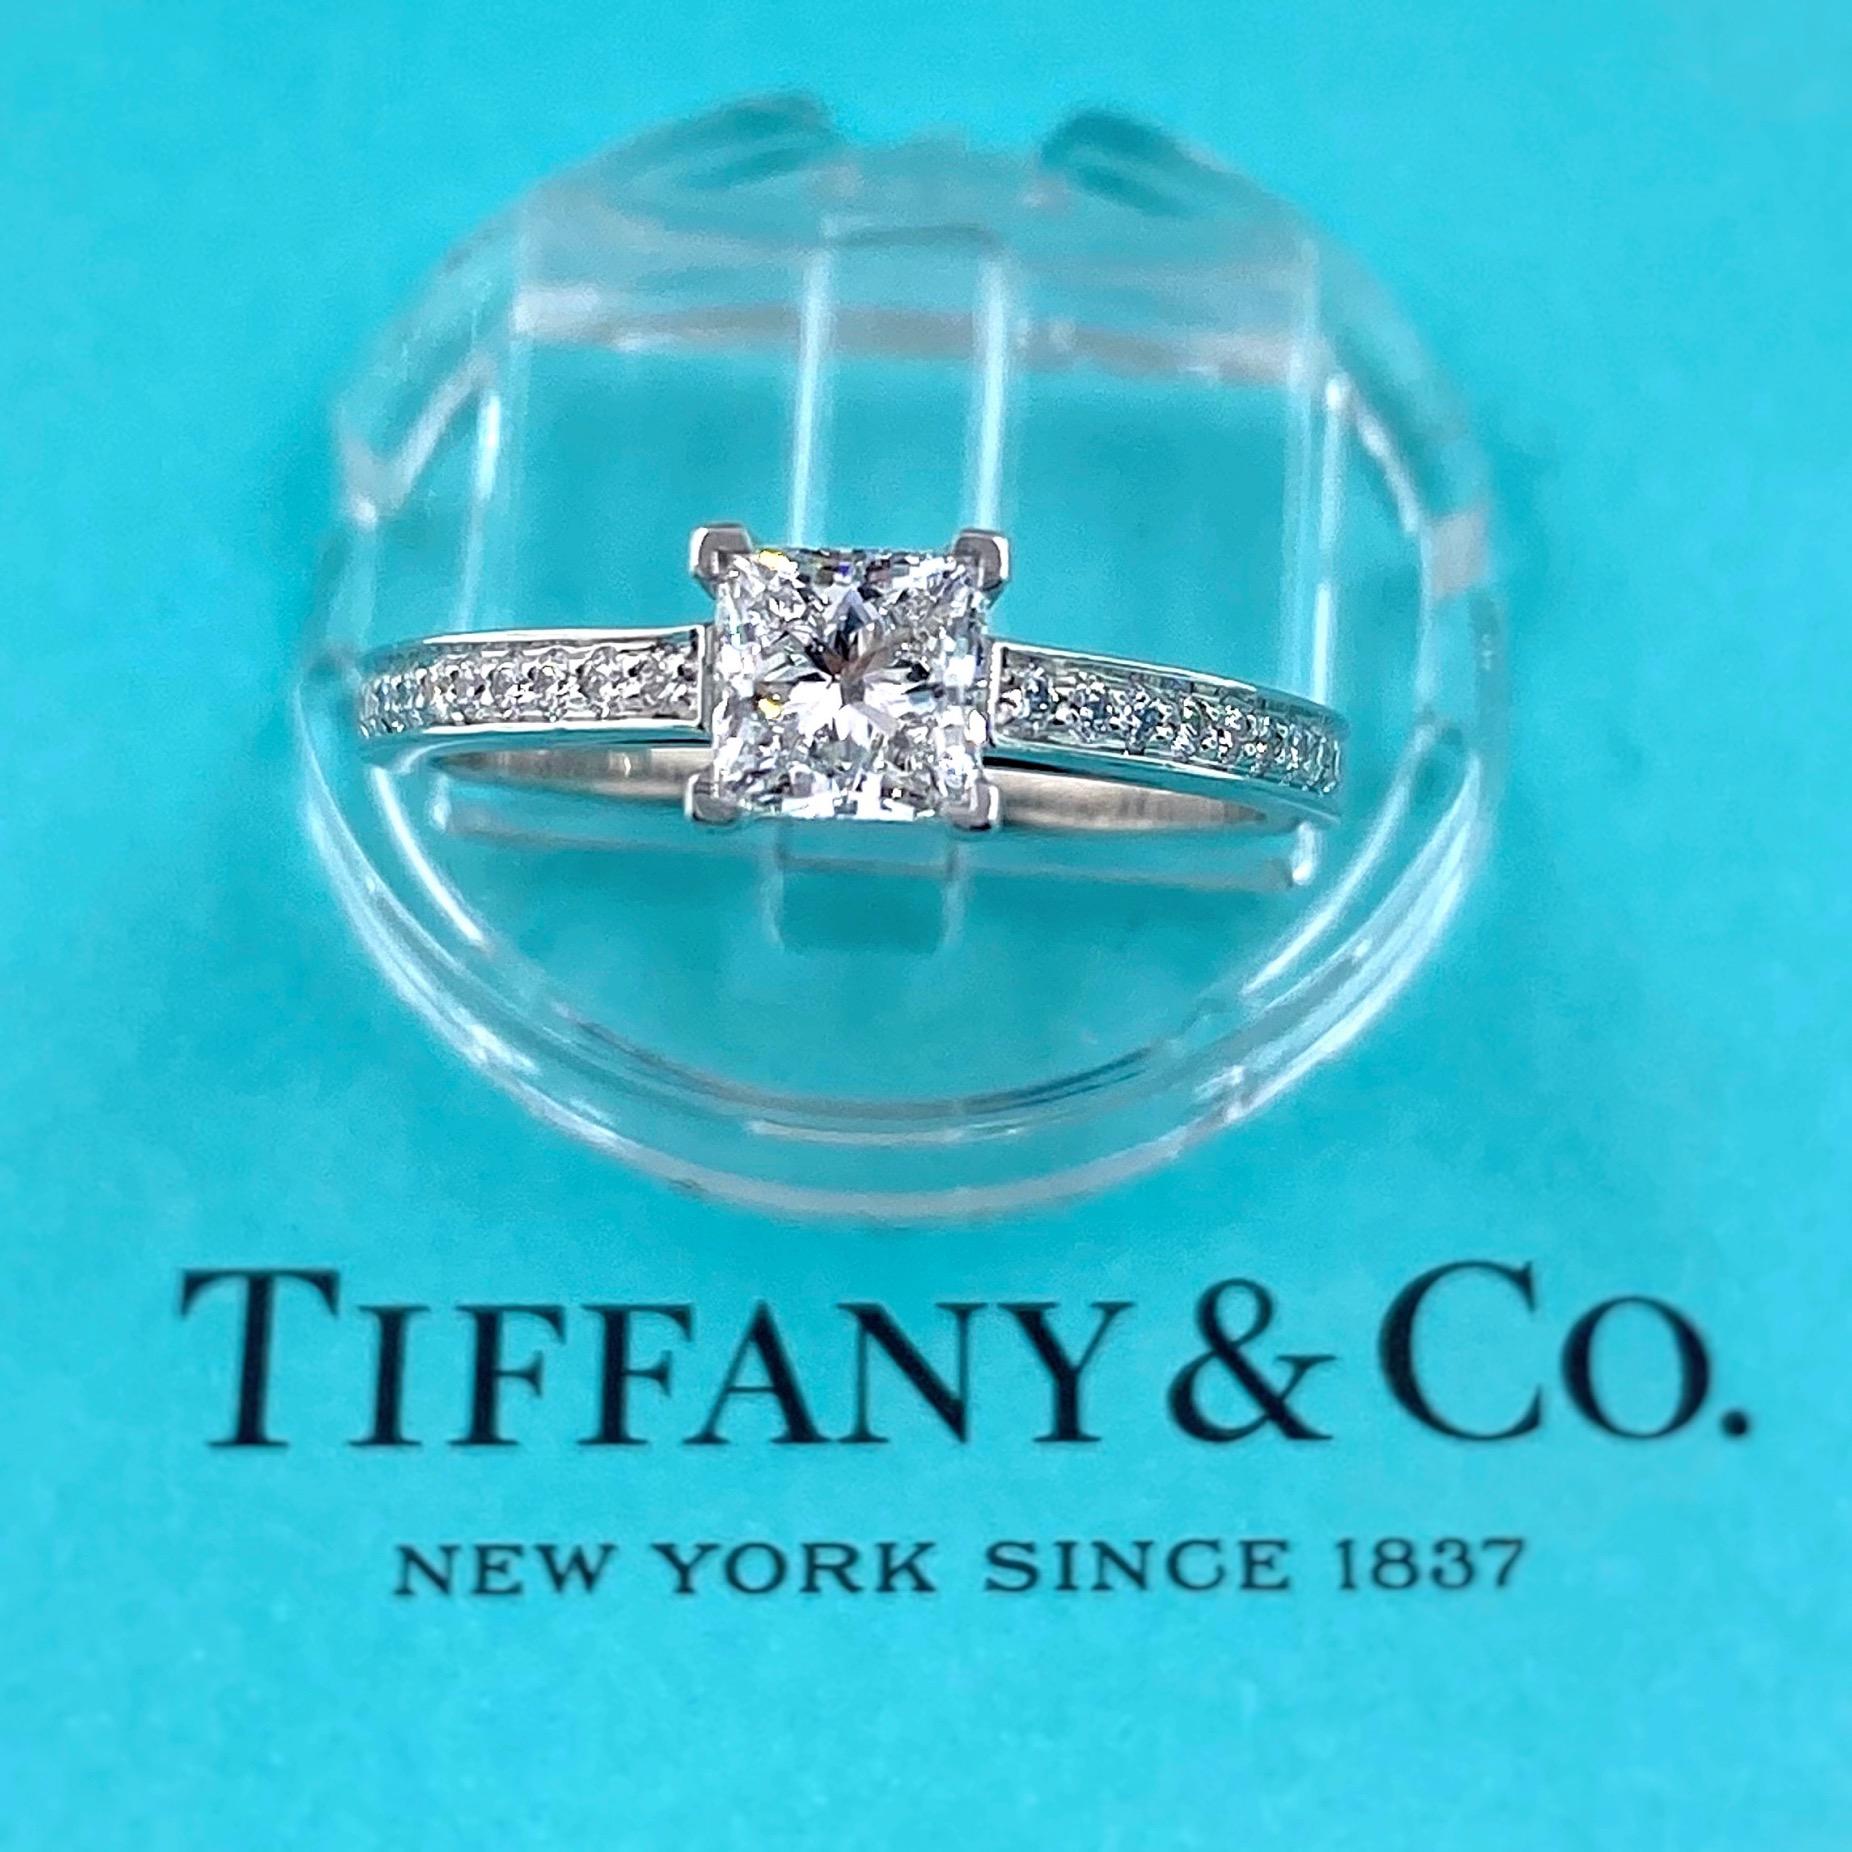 TIFFANY & CO. Grace Princess Diamond Engagement Ring
Style:  GRACE - Solitaire with Diamond Band
Ref. number:  27891306/L03160555
Metal:  PT950
Size:  5.5 - sizable
TCW:  0.76 tcw
Main Diamond:  Square Modified Brilliant ( Princess Cut ) Diamond